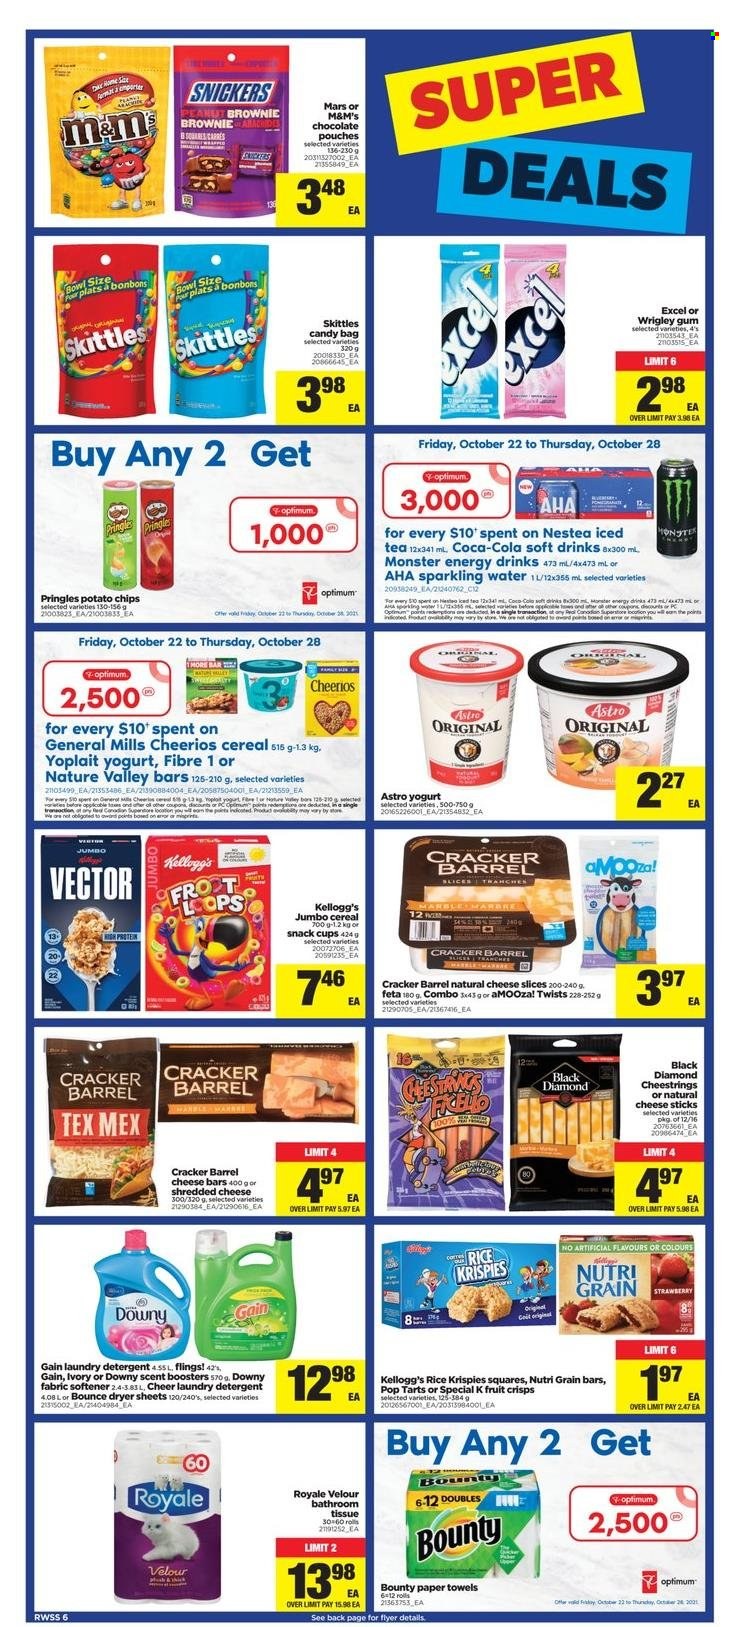 thumbnail - Real Canadian Superstore Flyer - October 22, 2021 - October 28, 2021 - Sales products - brownies, shredded cheese, sliced cheese, string cheese, feta, yoghurt, Yoplait, cheese sticks, chocolate, snack, Snickers, Bounty, Mars, crackers, Kellogg's, Skittles, potato chips, Pringles, cereals, Cheerios, Rice Krispies, Nature Valley, Nutri-Grain, Coca-Cola, energy drink, Monster, ice tea, soft drink, Monster Energy, sparkling water, tissues, kitchen towels, paper towels, Gain, fabric softener, laundry detergent, Bounce, dryer sheets, scent booster, Downy Laundry, cup, Optimum, rode, owl, vitamin D3, detergent, chips, M&M's. Page 6.